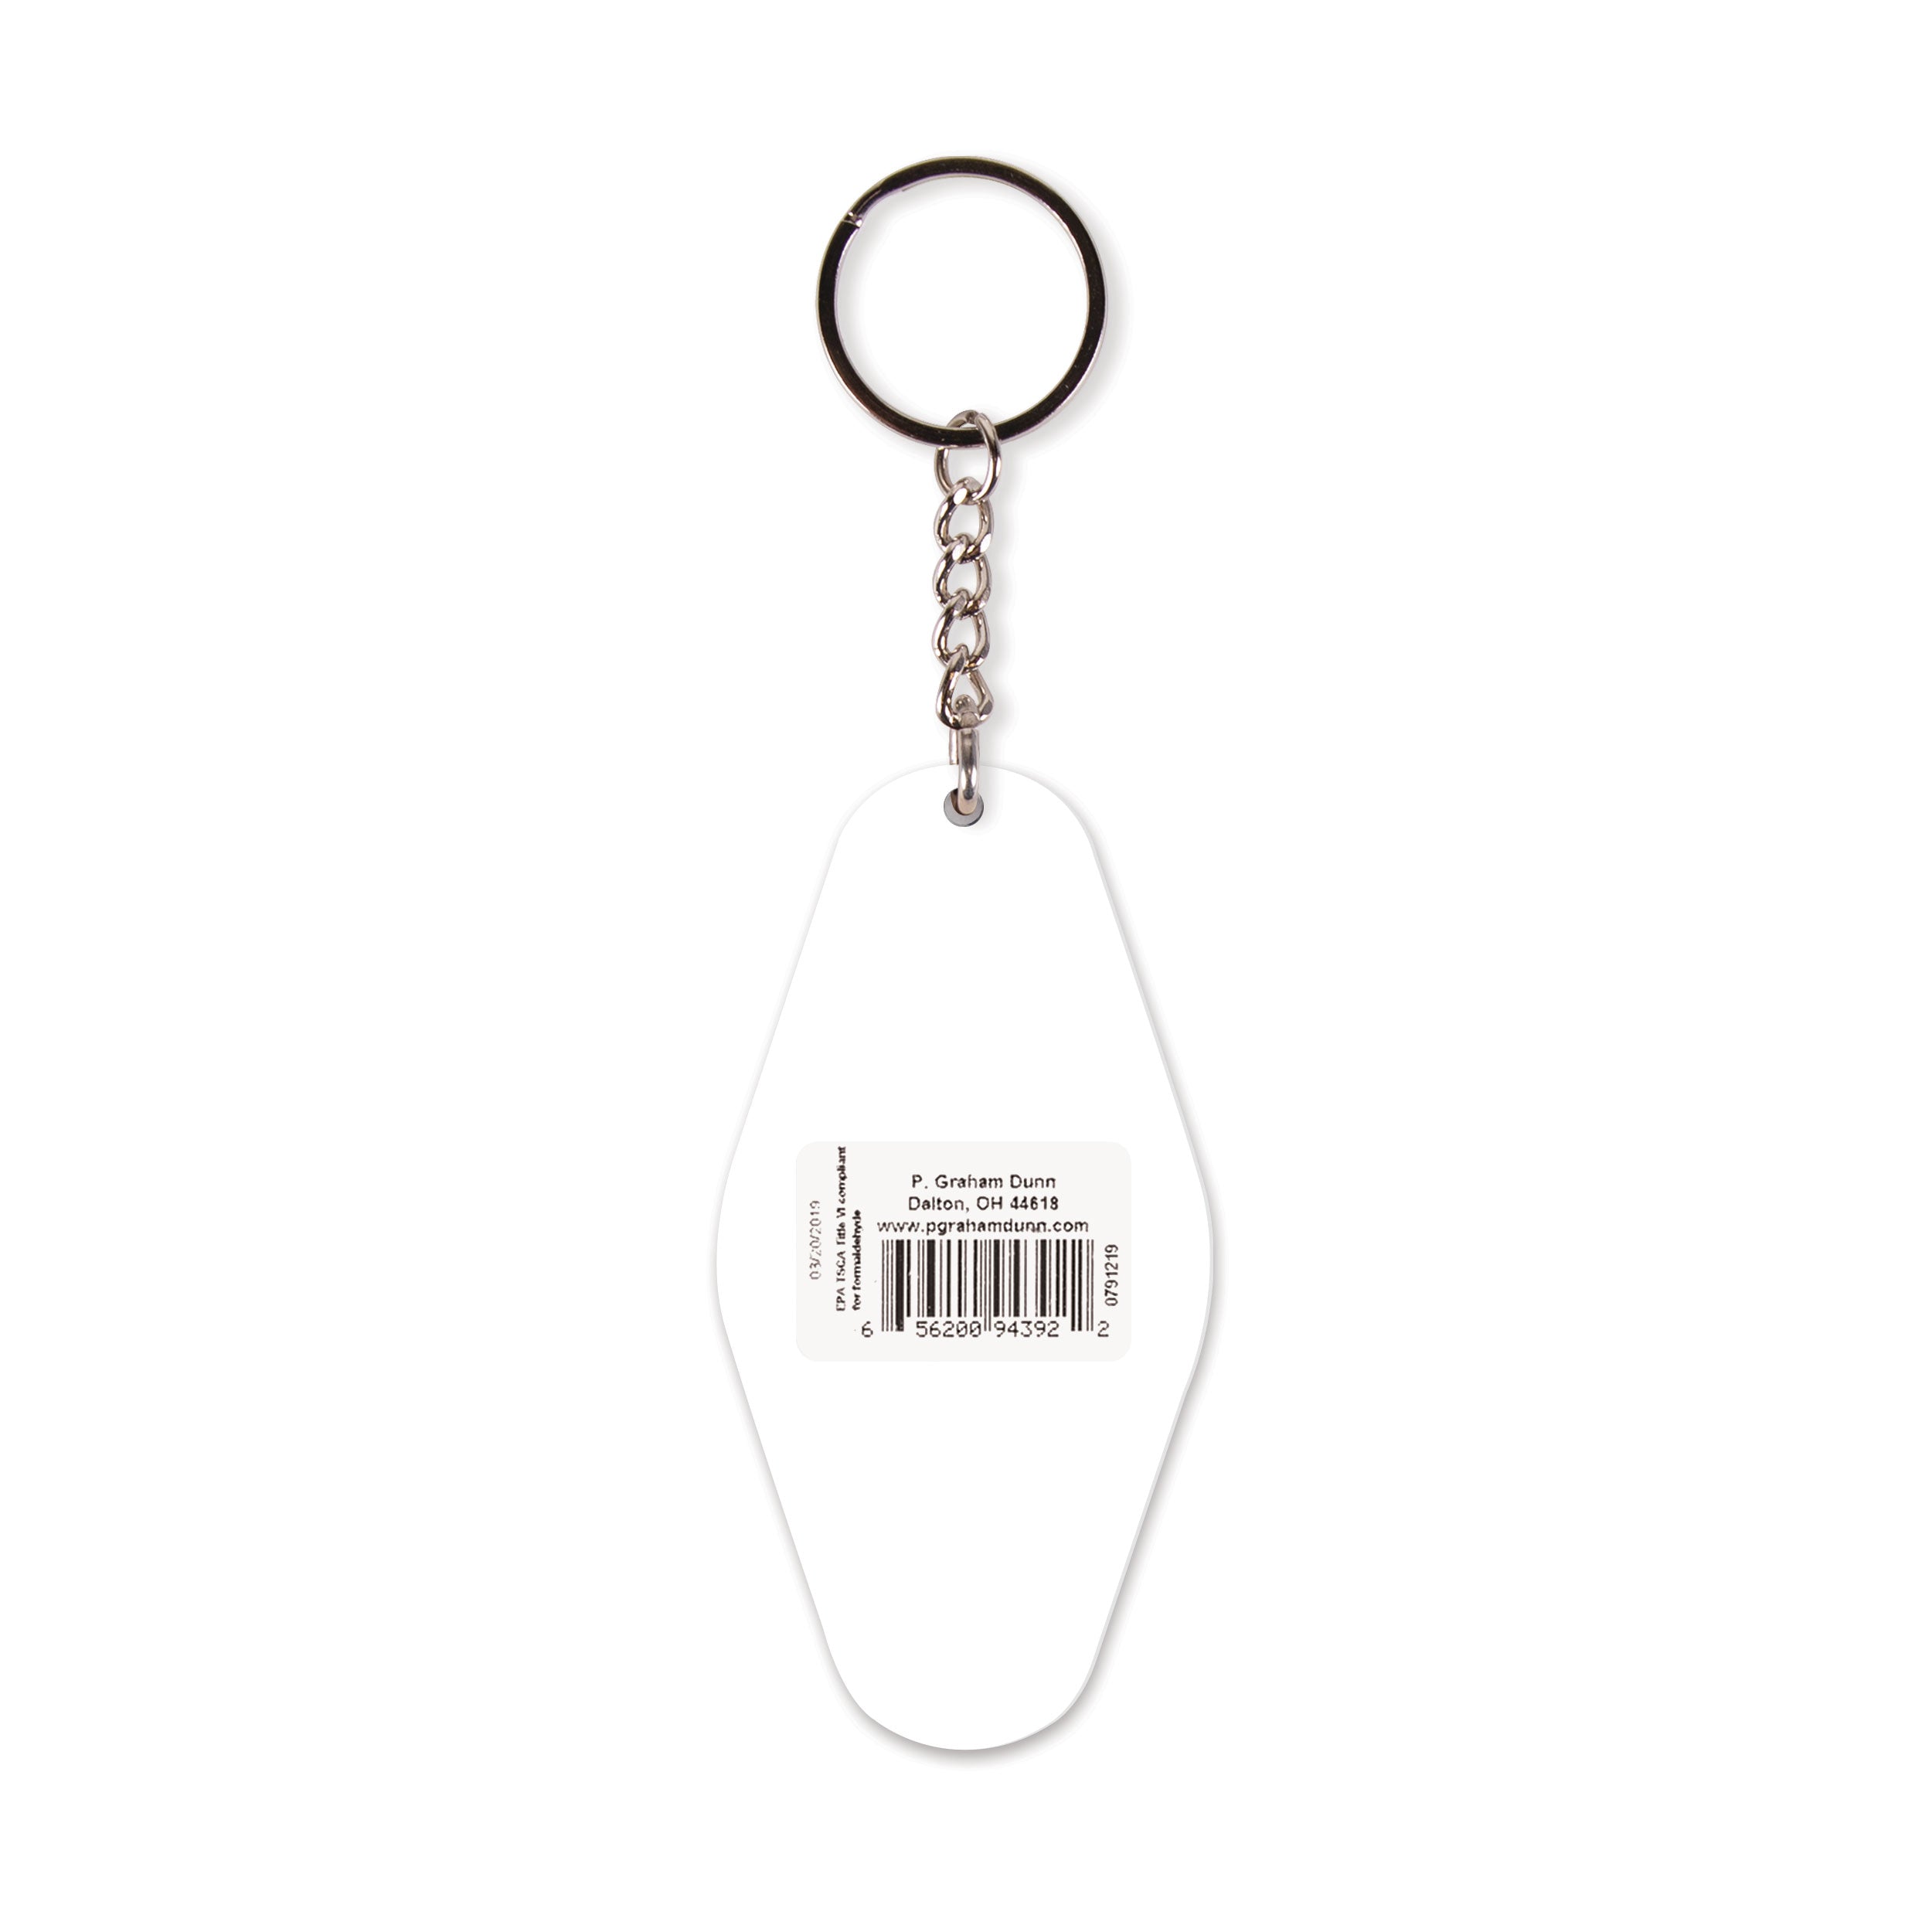 Make Today Amazing Vintage Engraved Key Chain